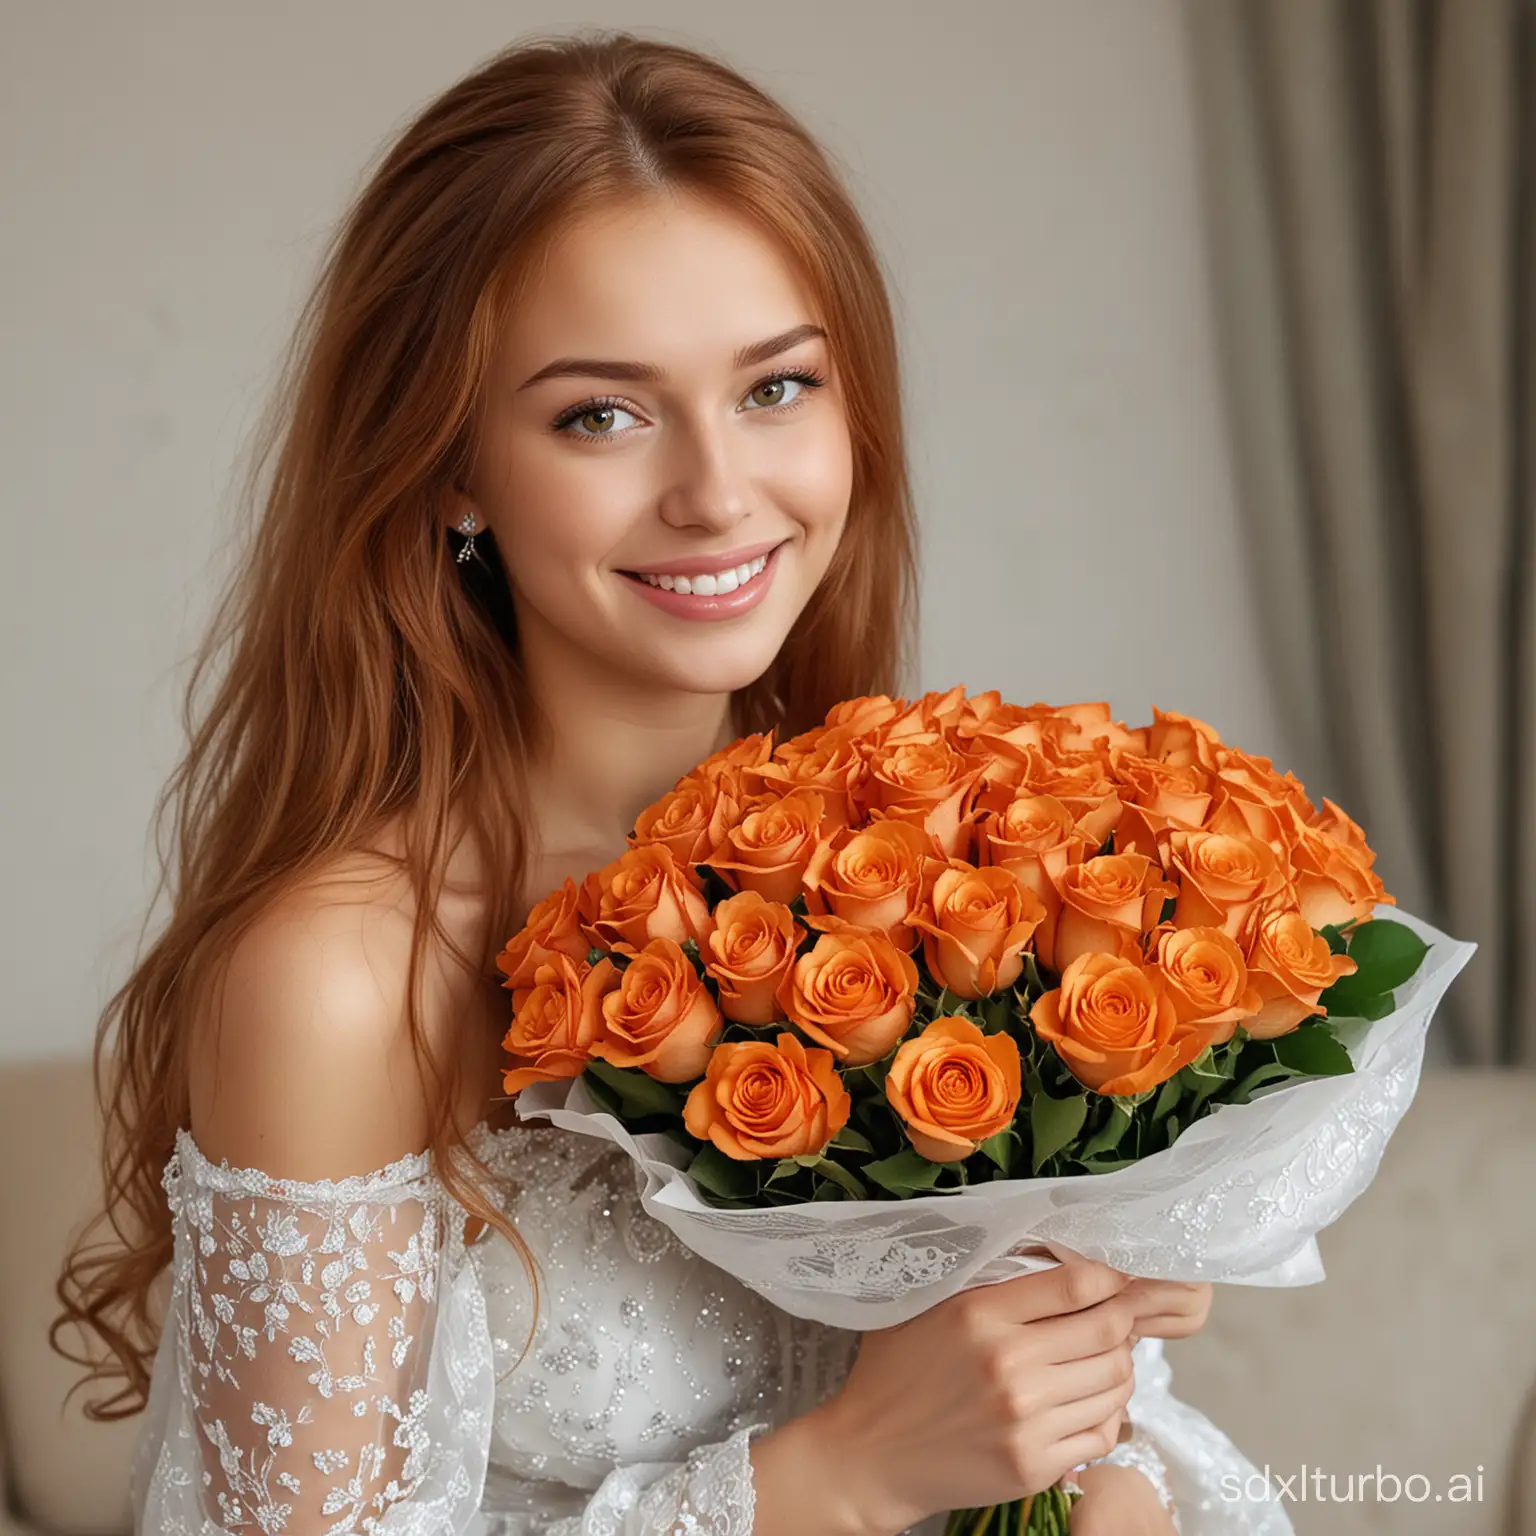 Young Russian girl, perfect face, shy and dignified, very shy, very arousing!!!! The cutest, the cutest face, the most beautiful eyes, super friendly smile, eyes very meticulous, eyes looking at the camera, very meticulous eyes, realistic in an evening gown, with long red hair holding a large bouquet of 101 orange roses, standing in the living room